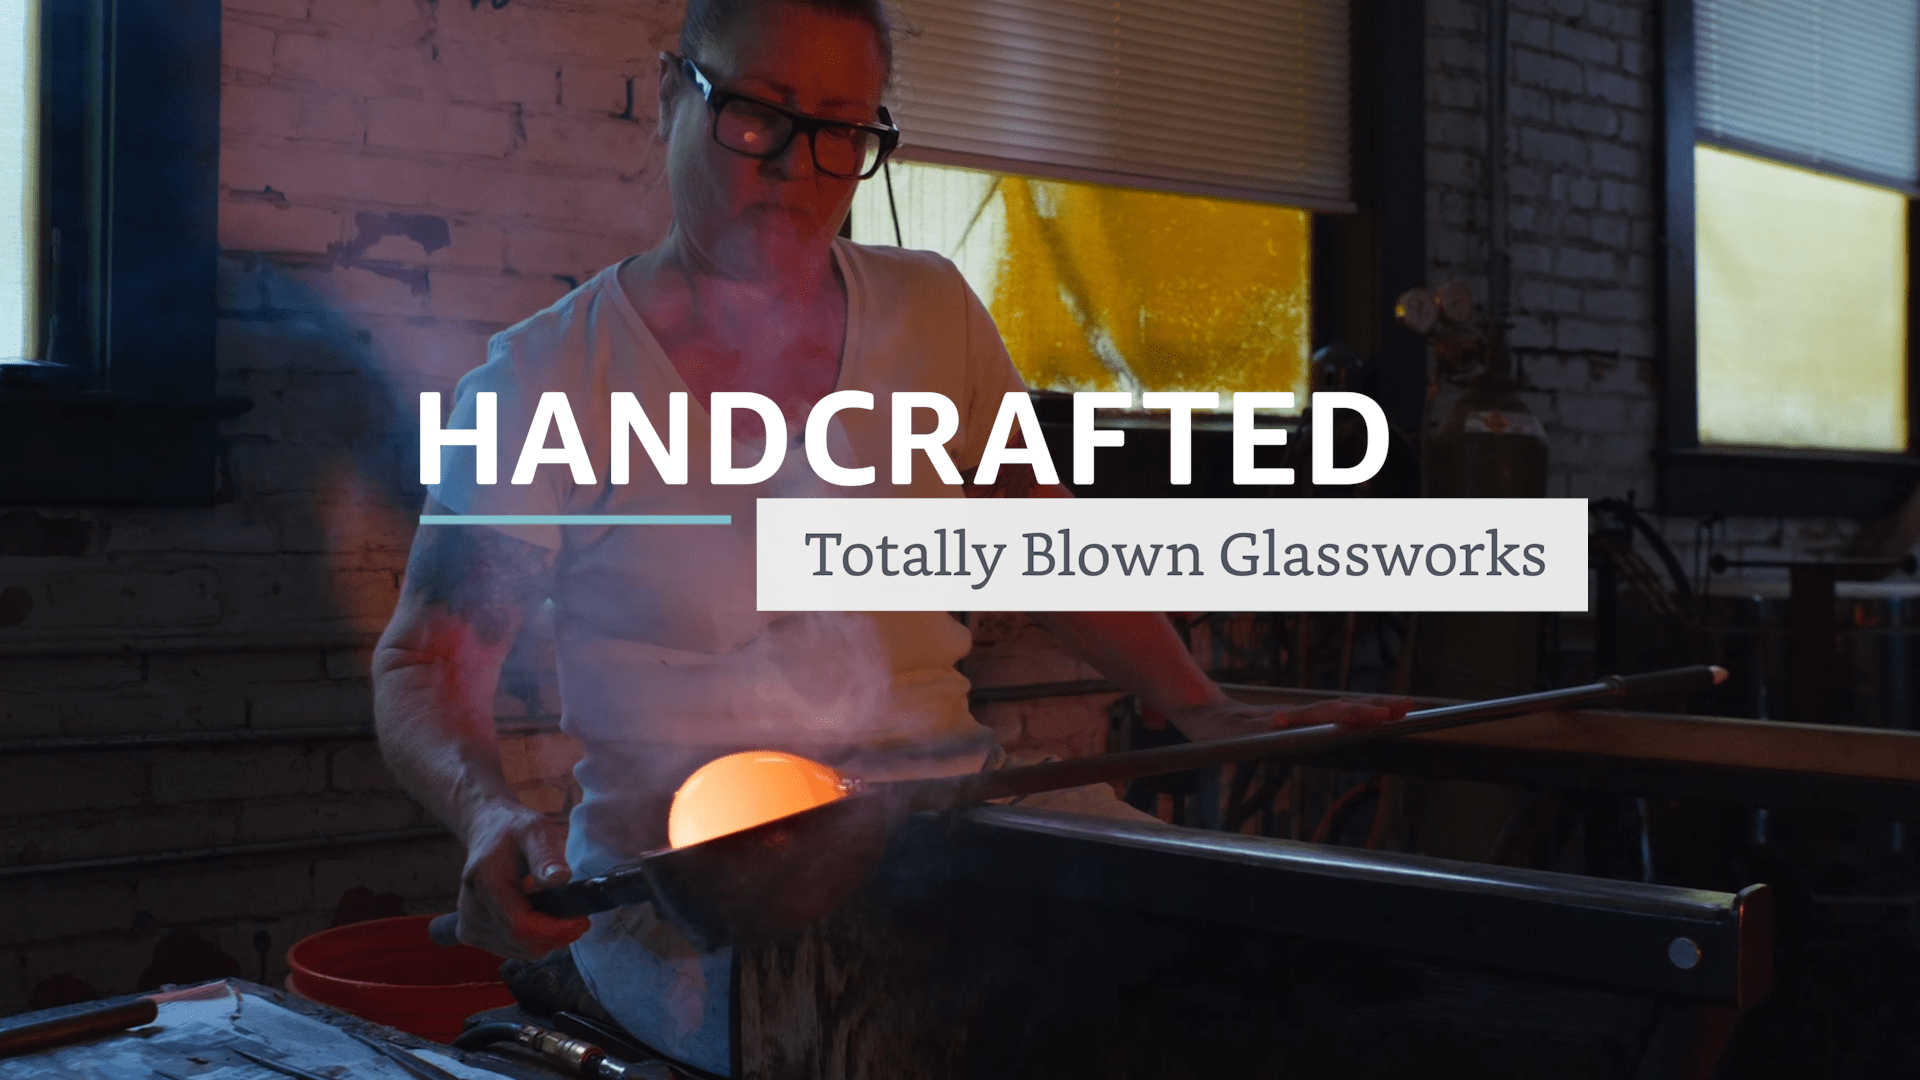 Handcrafted: Totally Blown Glassworks